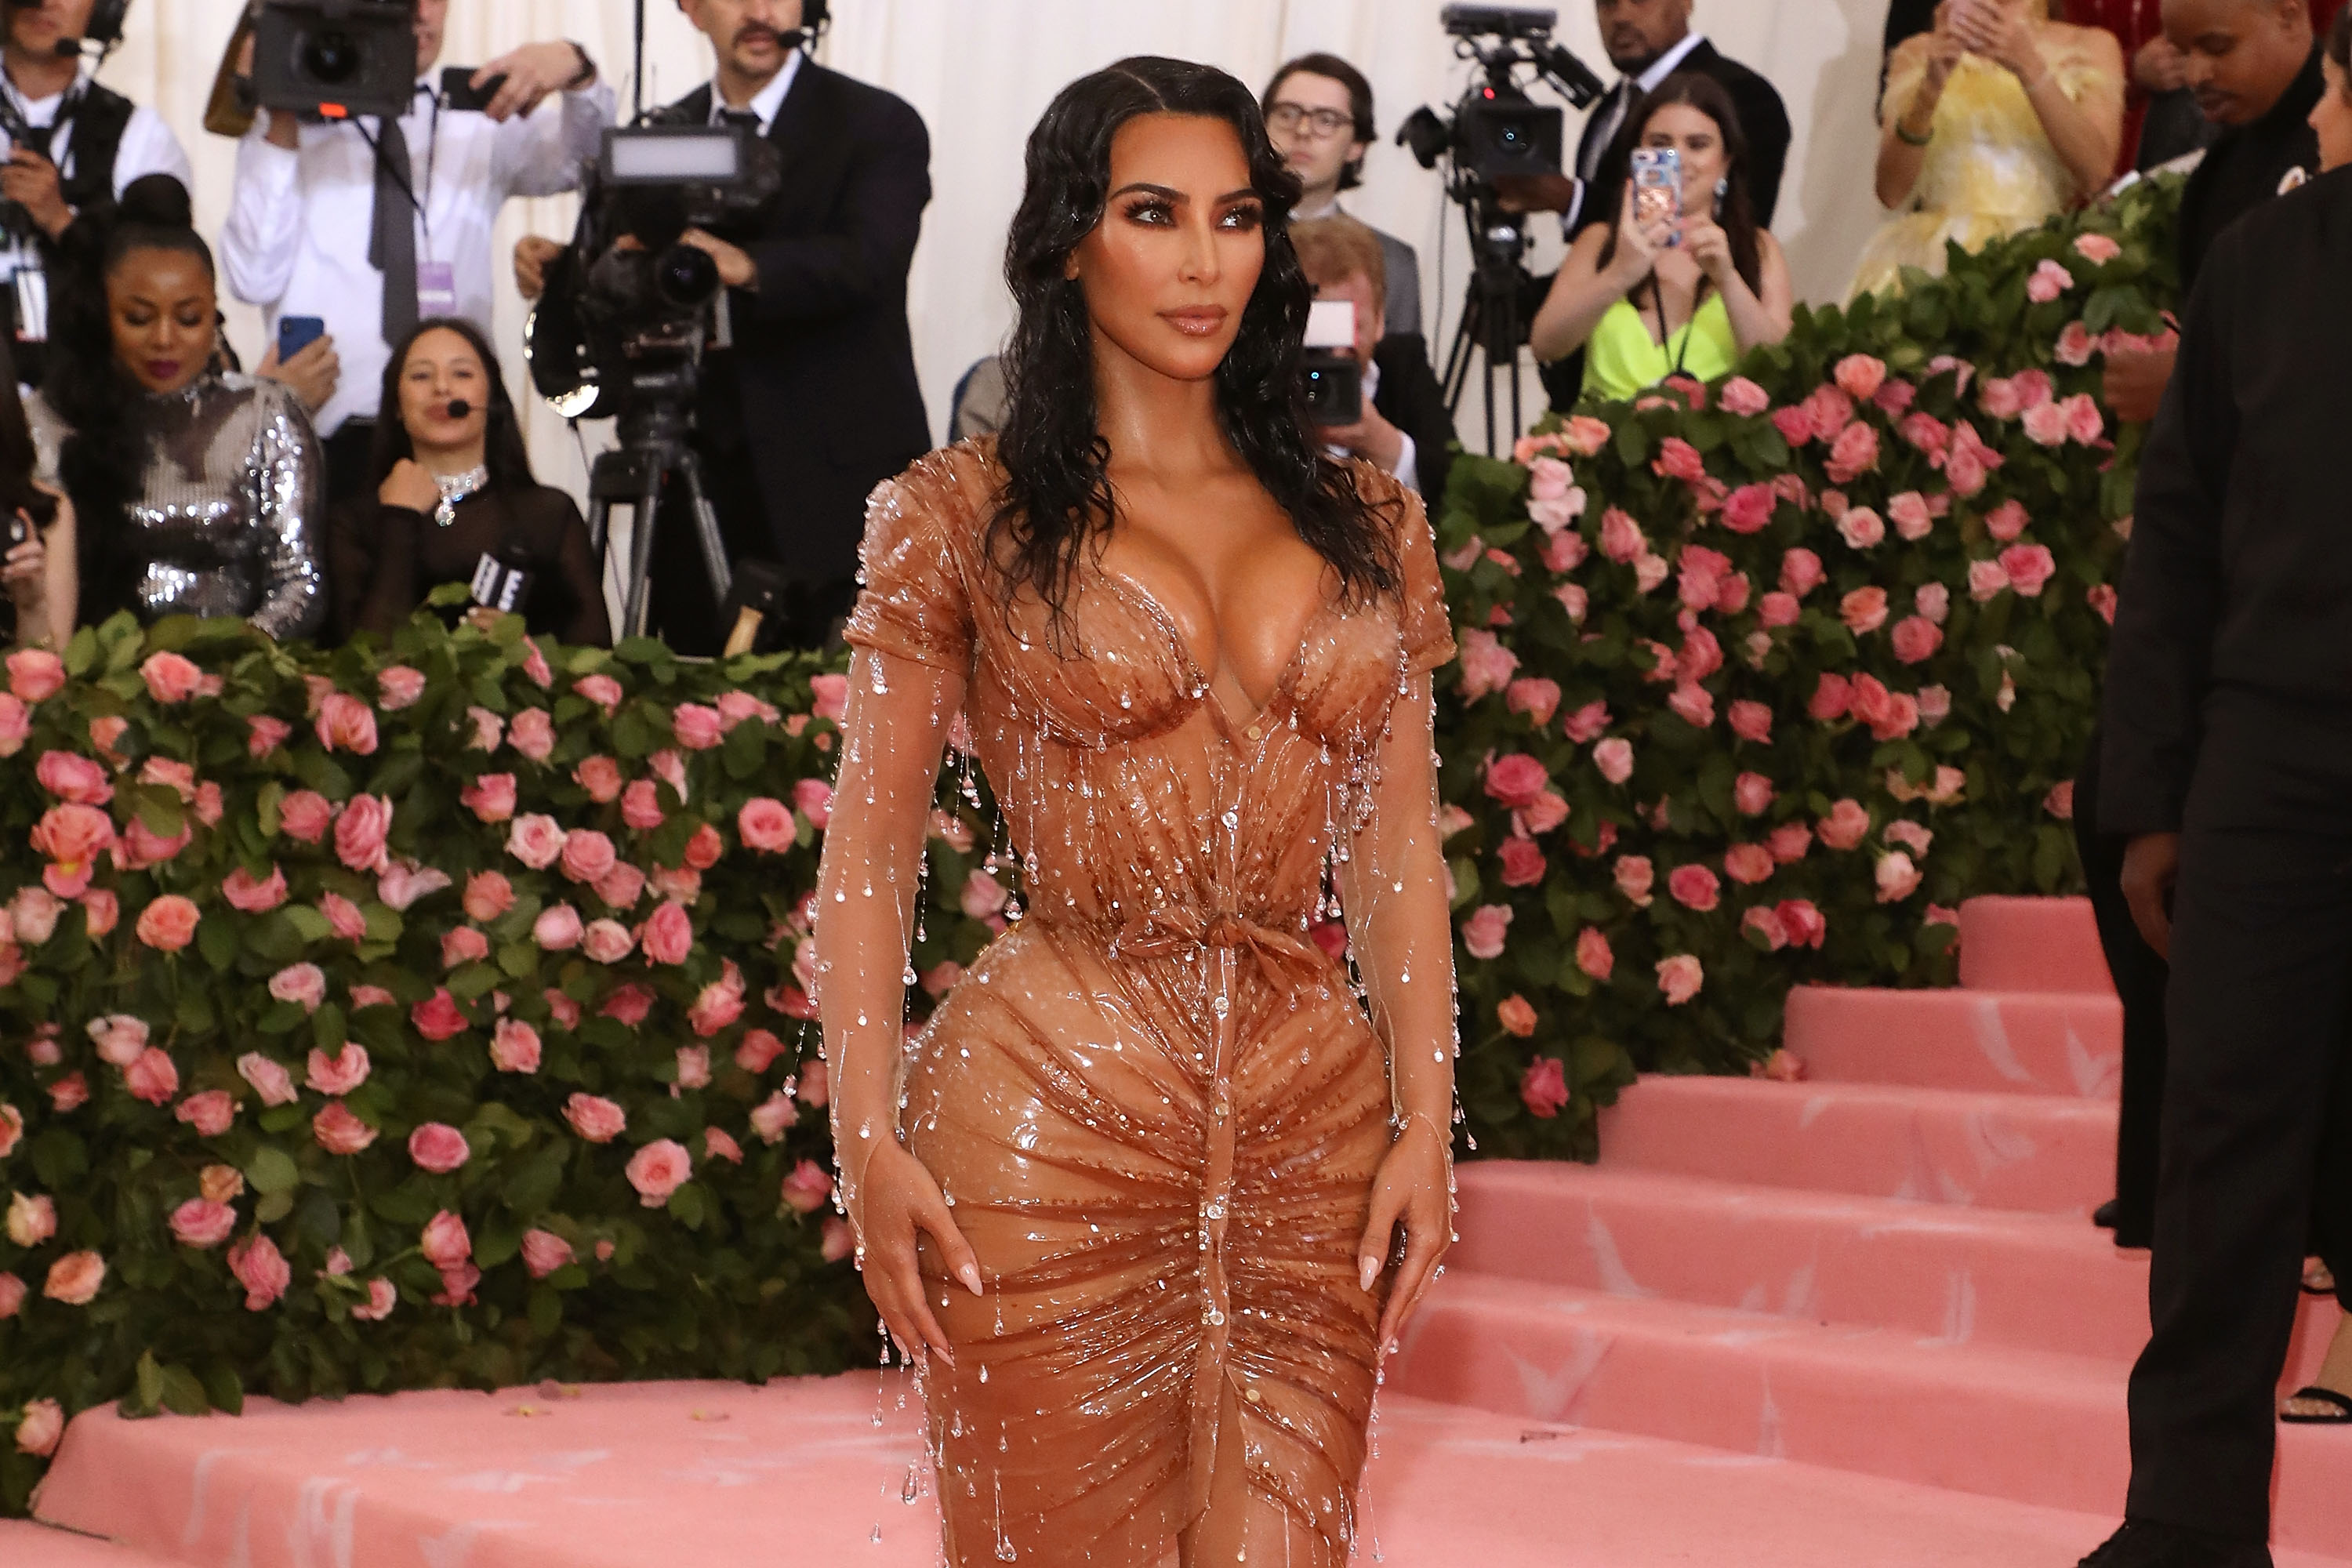 When she's not at the Met Gala, Kim Kardashian West is freeing prisoners  (Photo by Taylor Hill/FilmMagic)